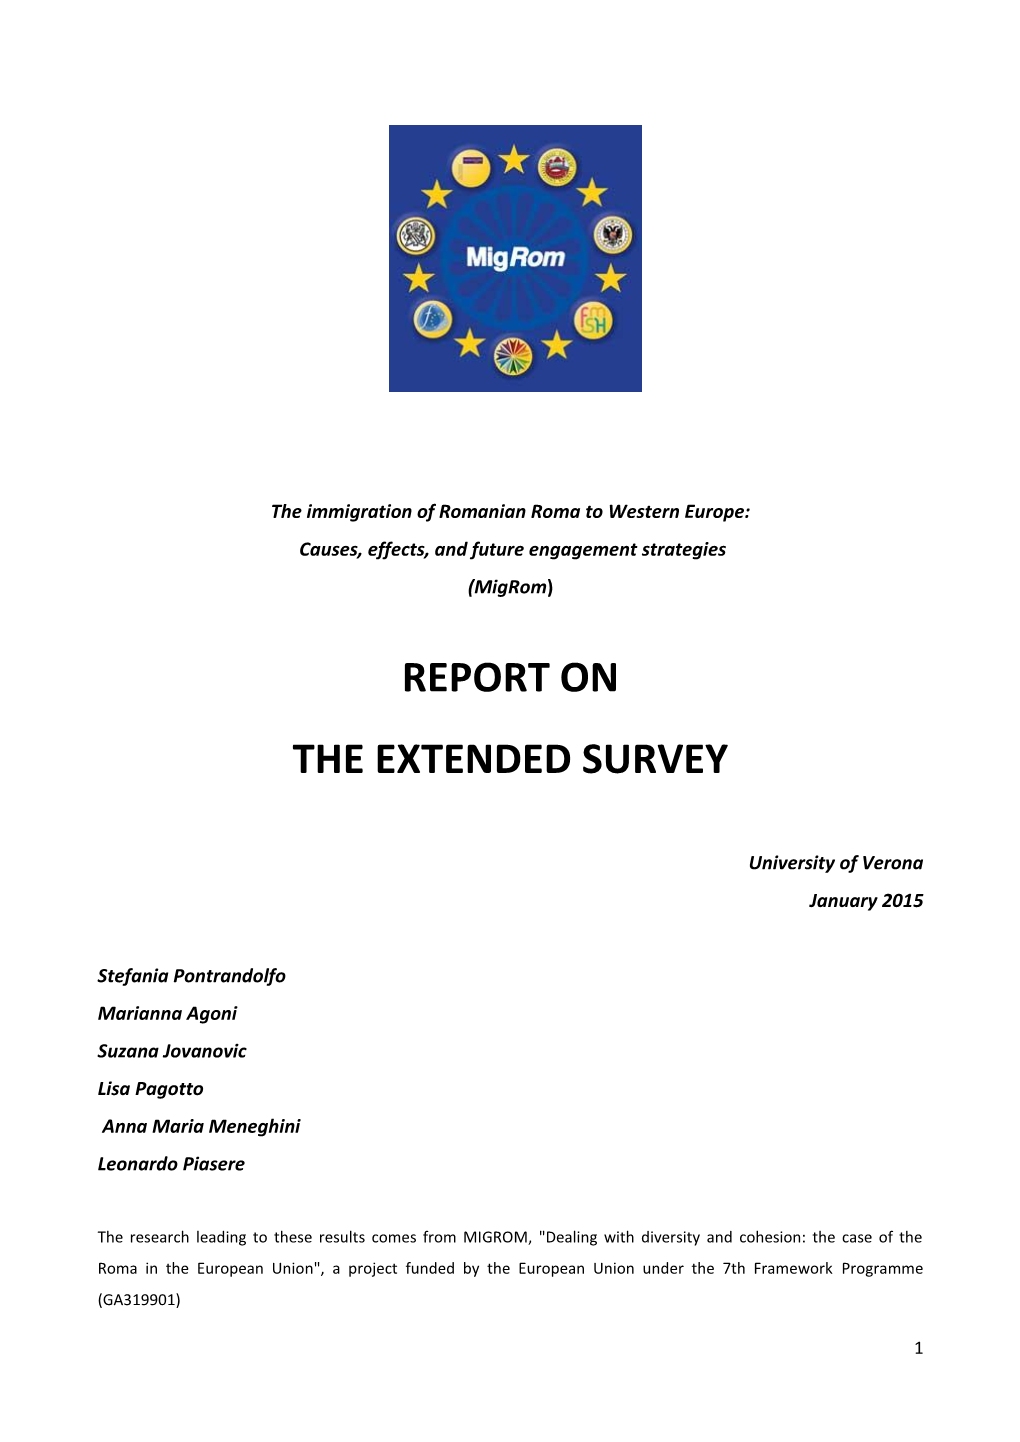 Report on the Extended Survey